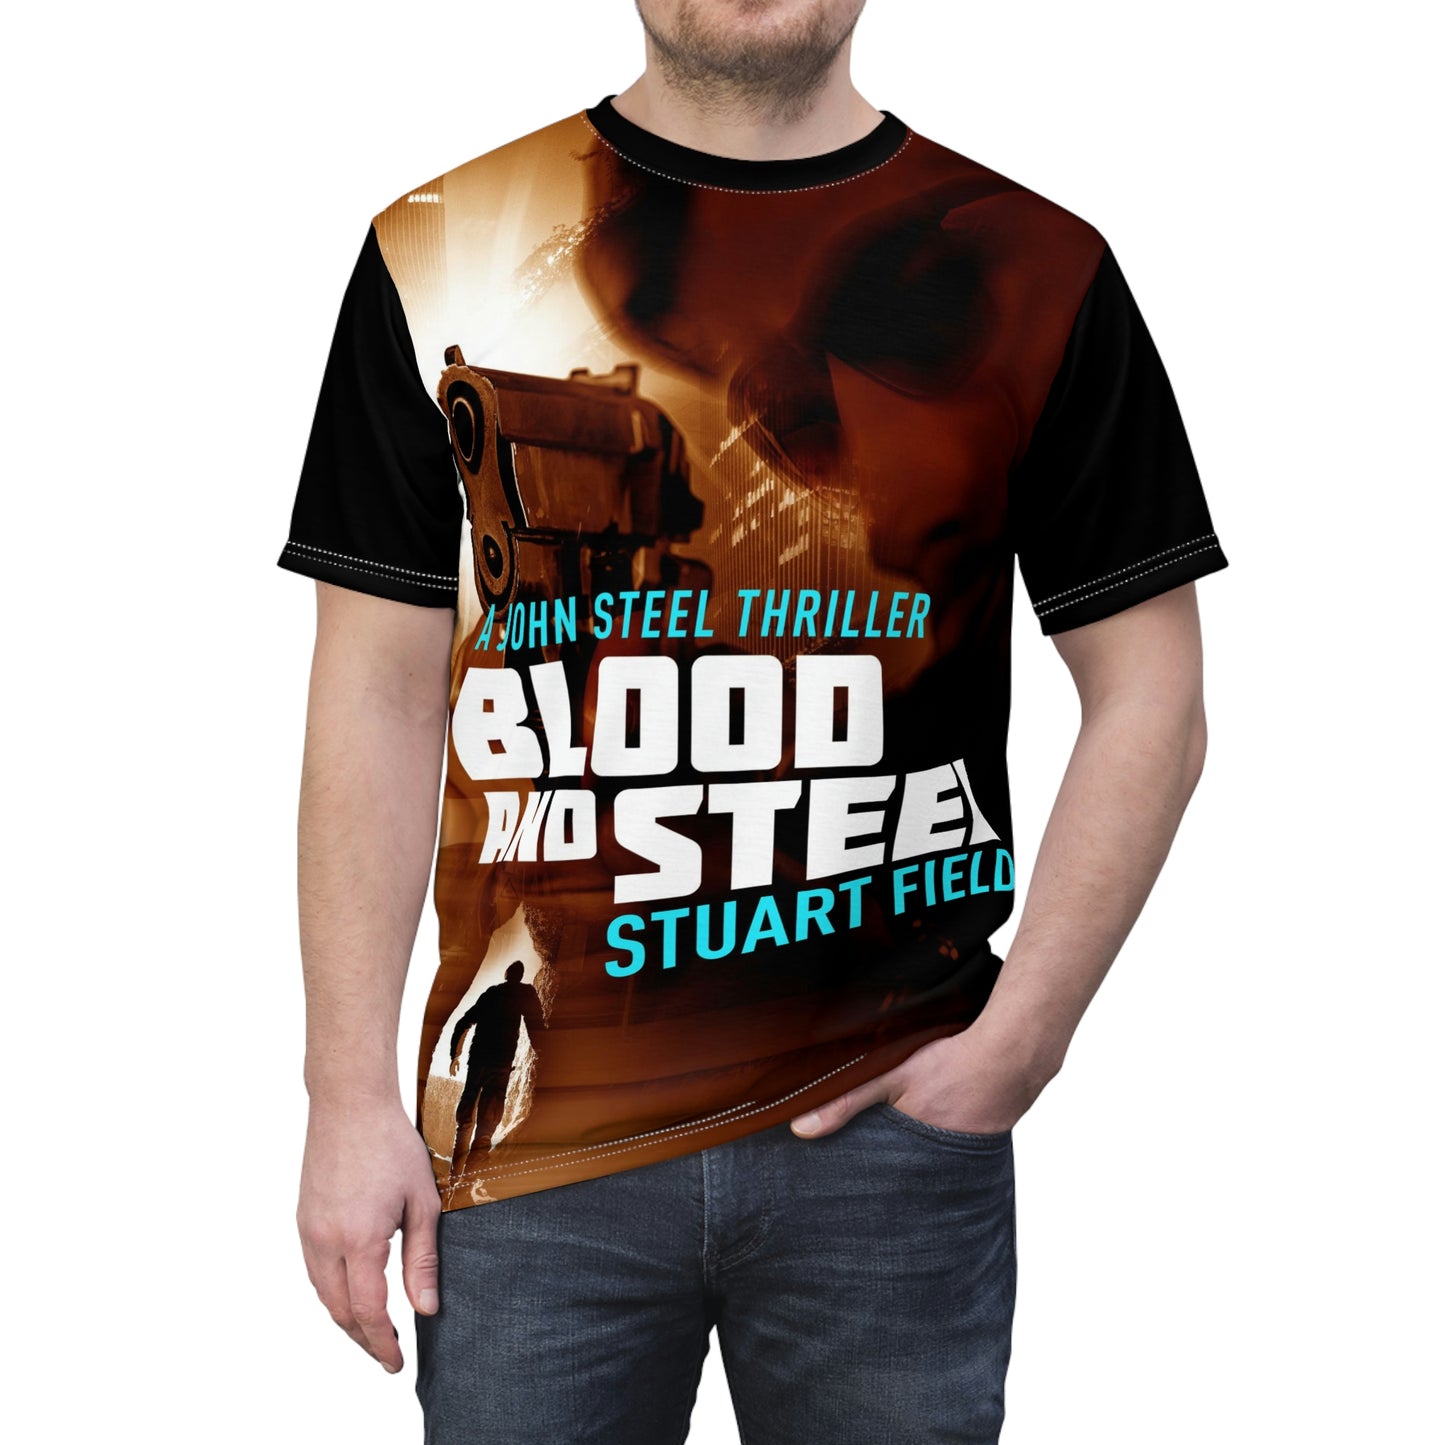 Blood And Steel - Unisex All-Over Print Cut & Sew T-Shirt